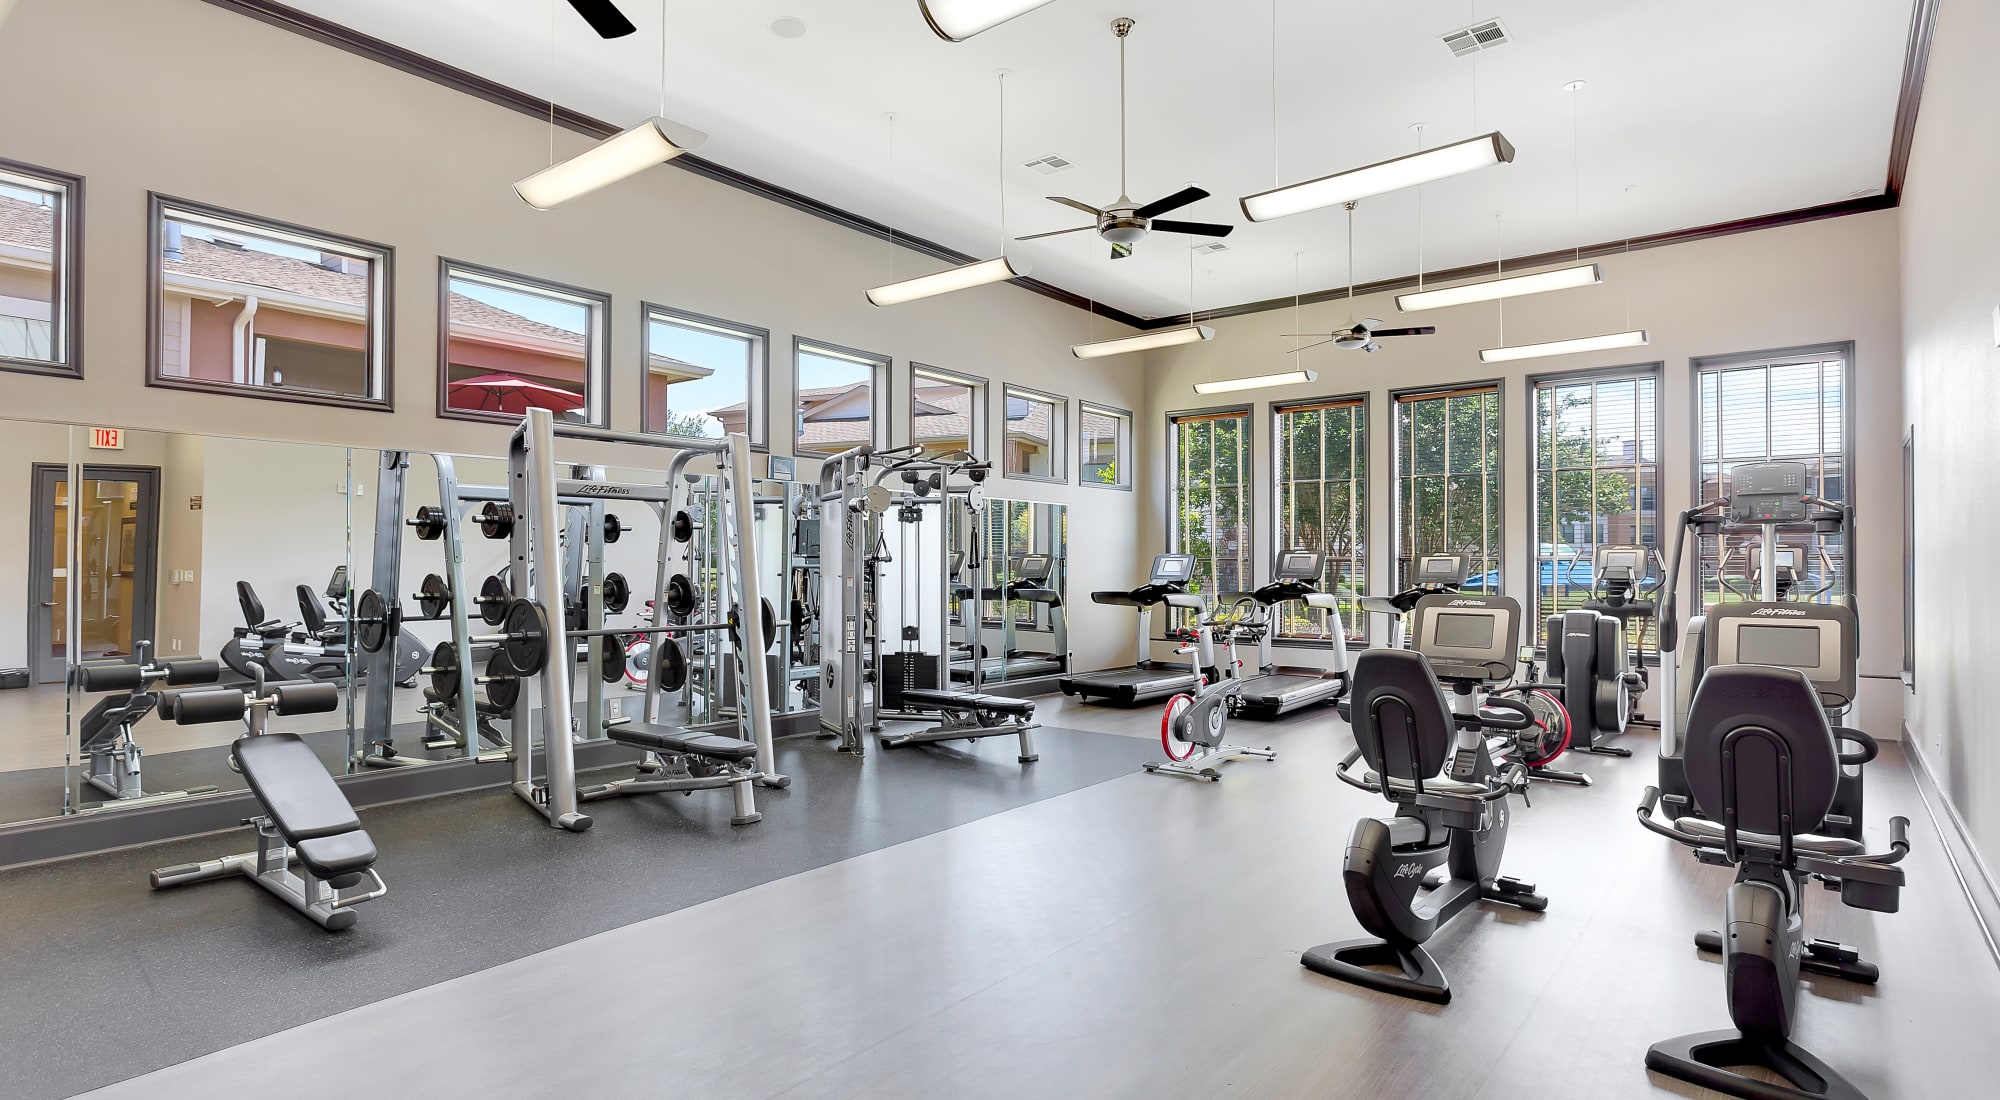 Fitness center at Onion Creek